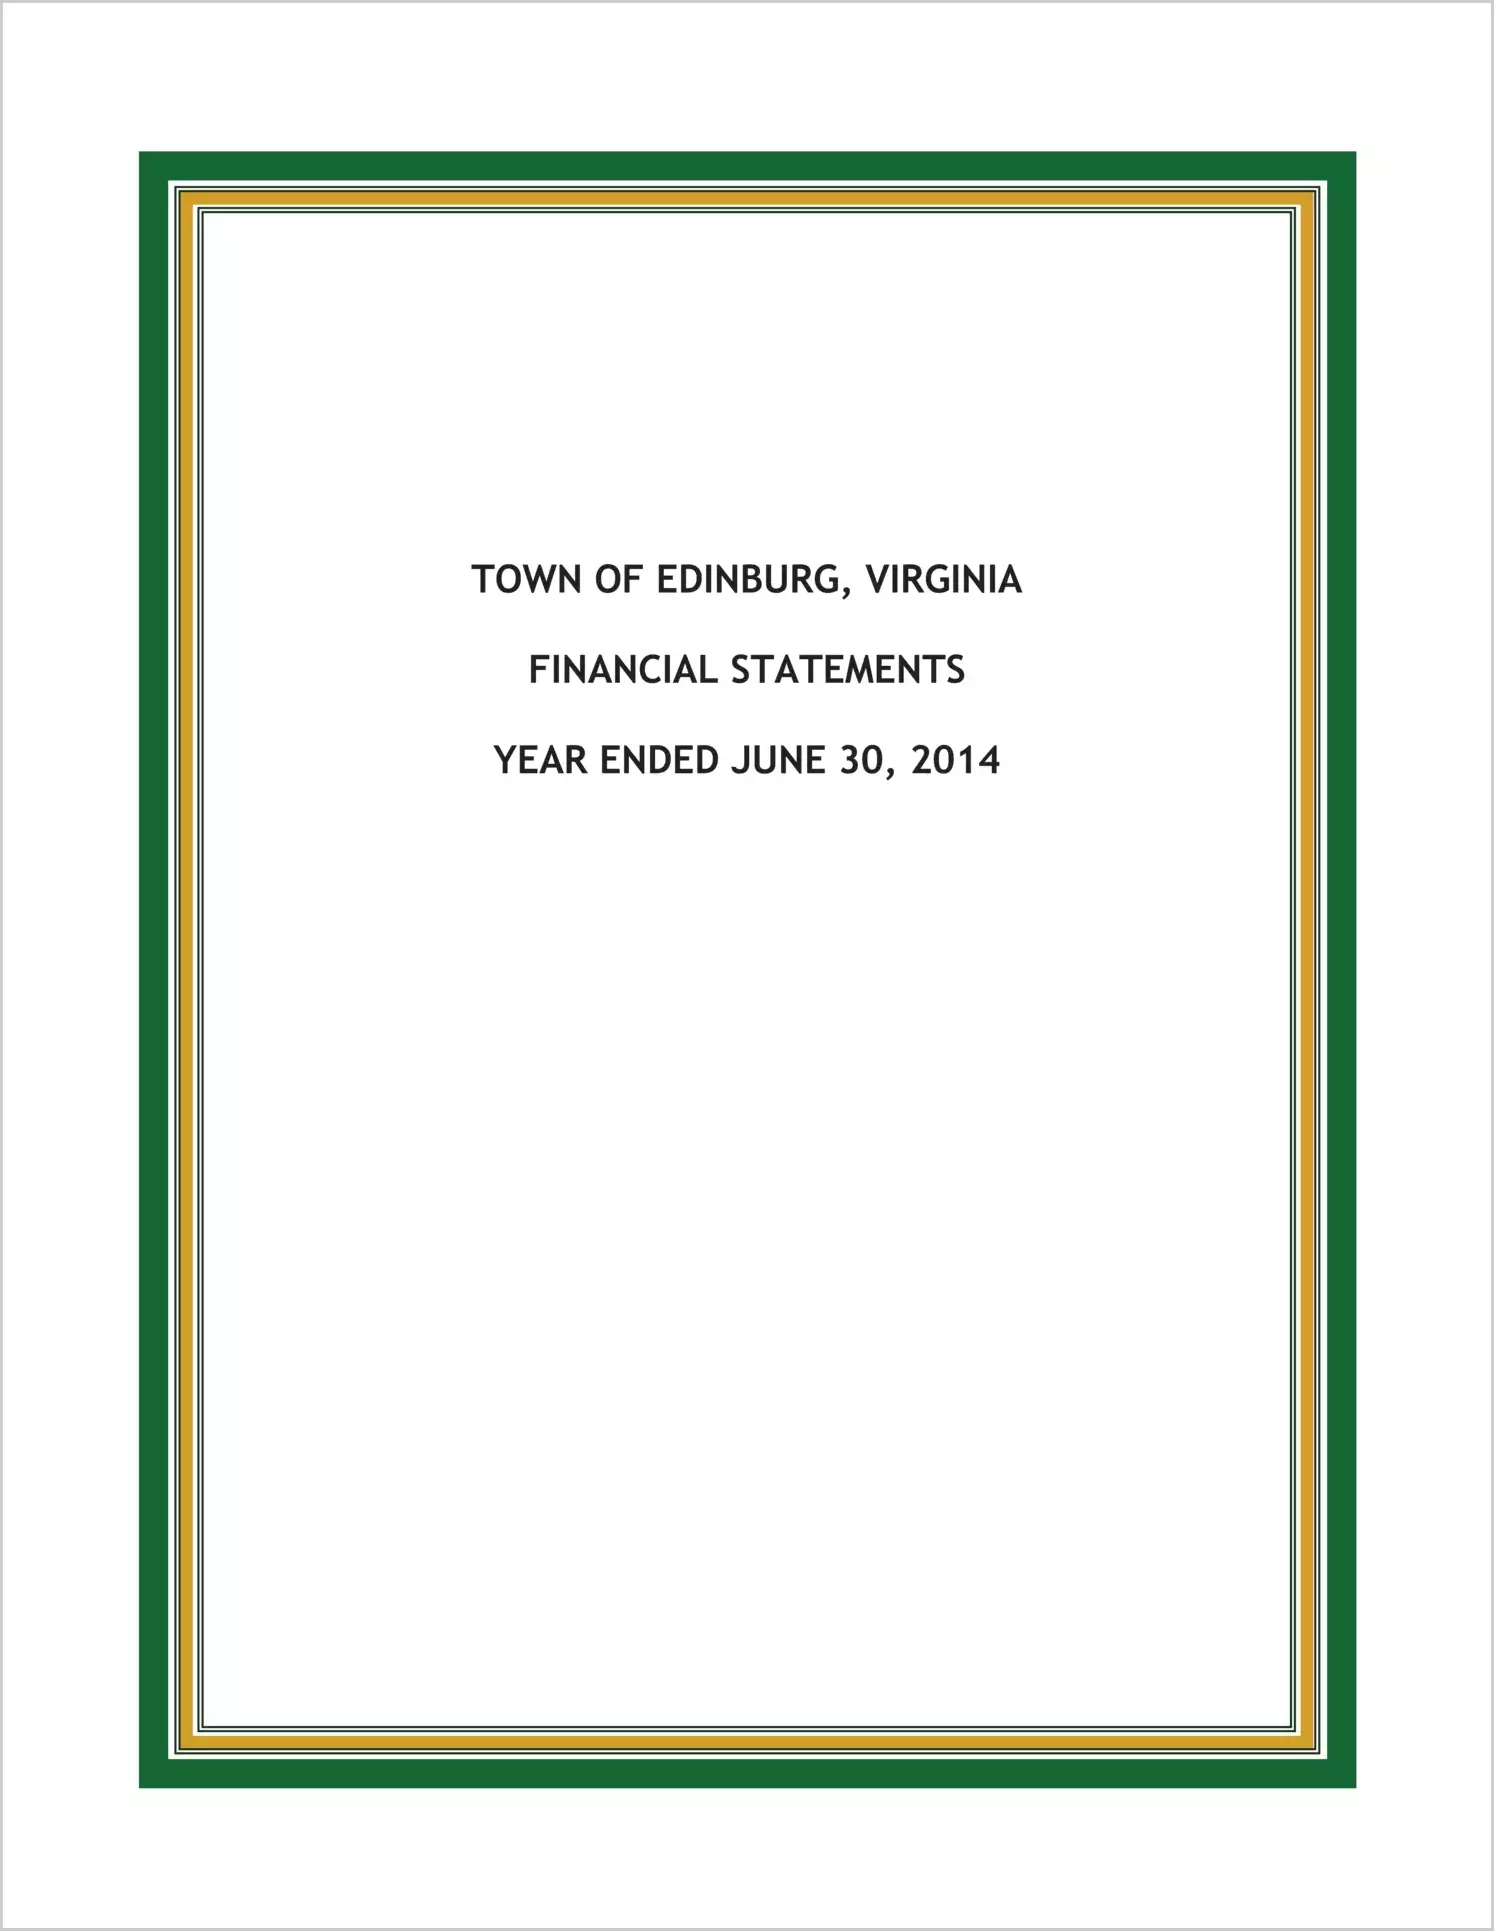 2014 Annual Financial Report for Town of Edinburg